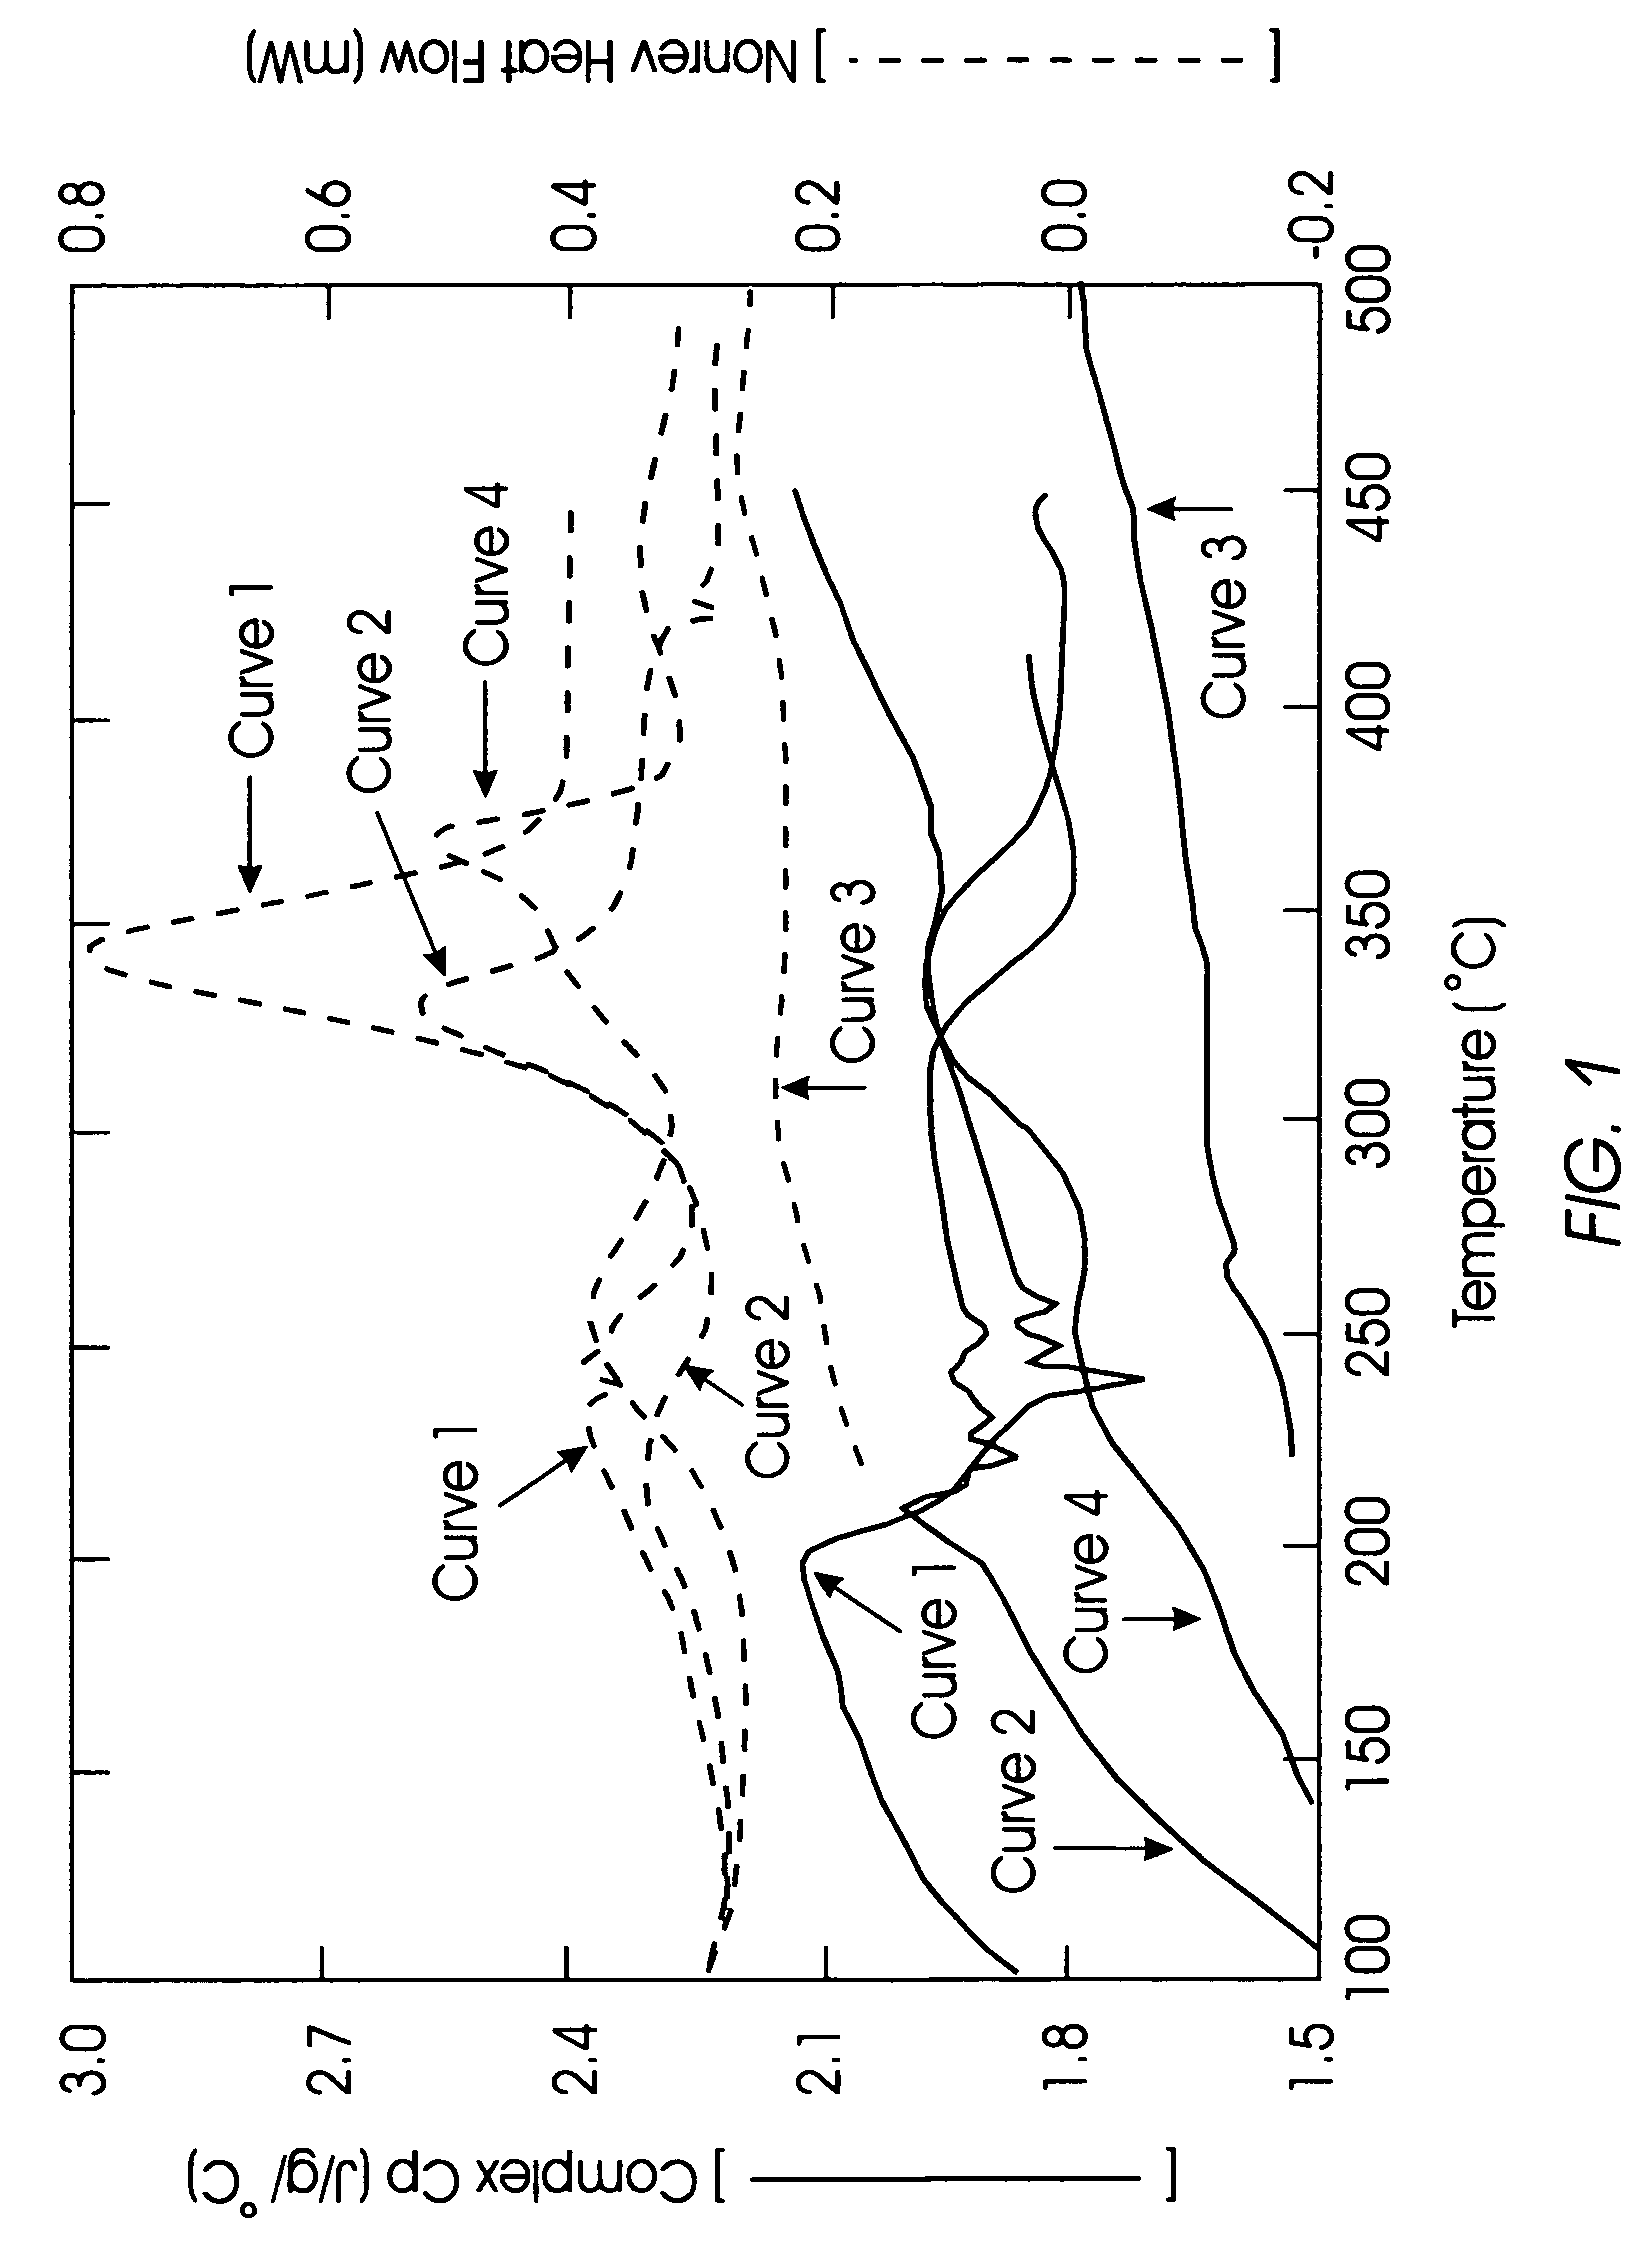 Porous composition of matter, and method of making same